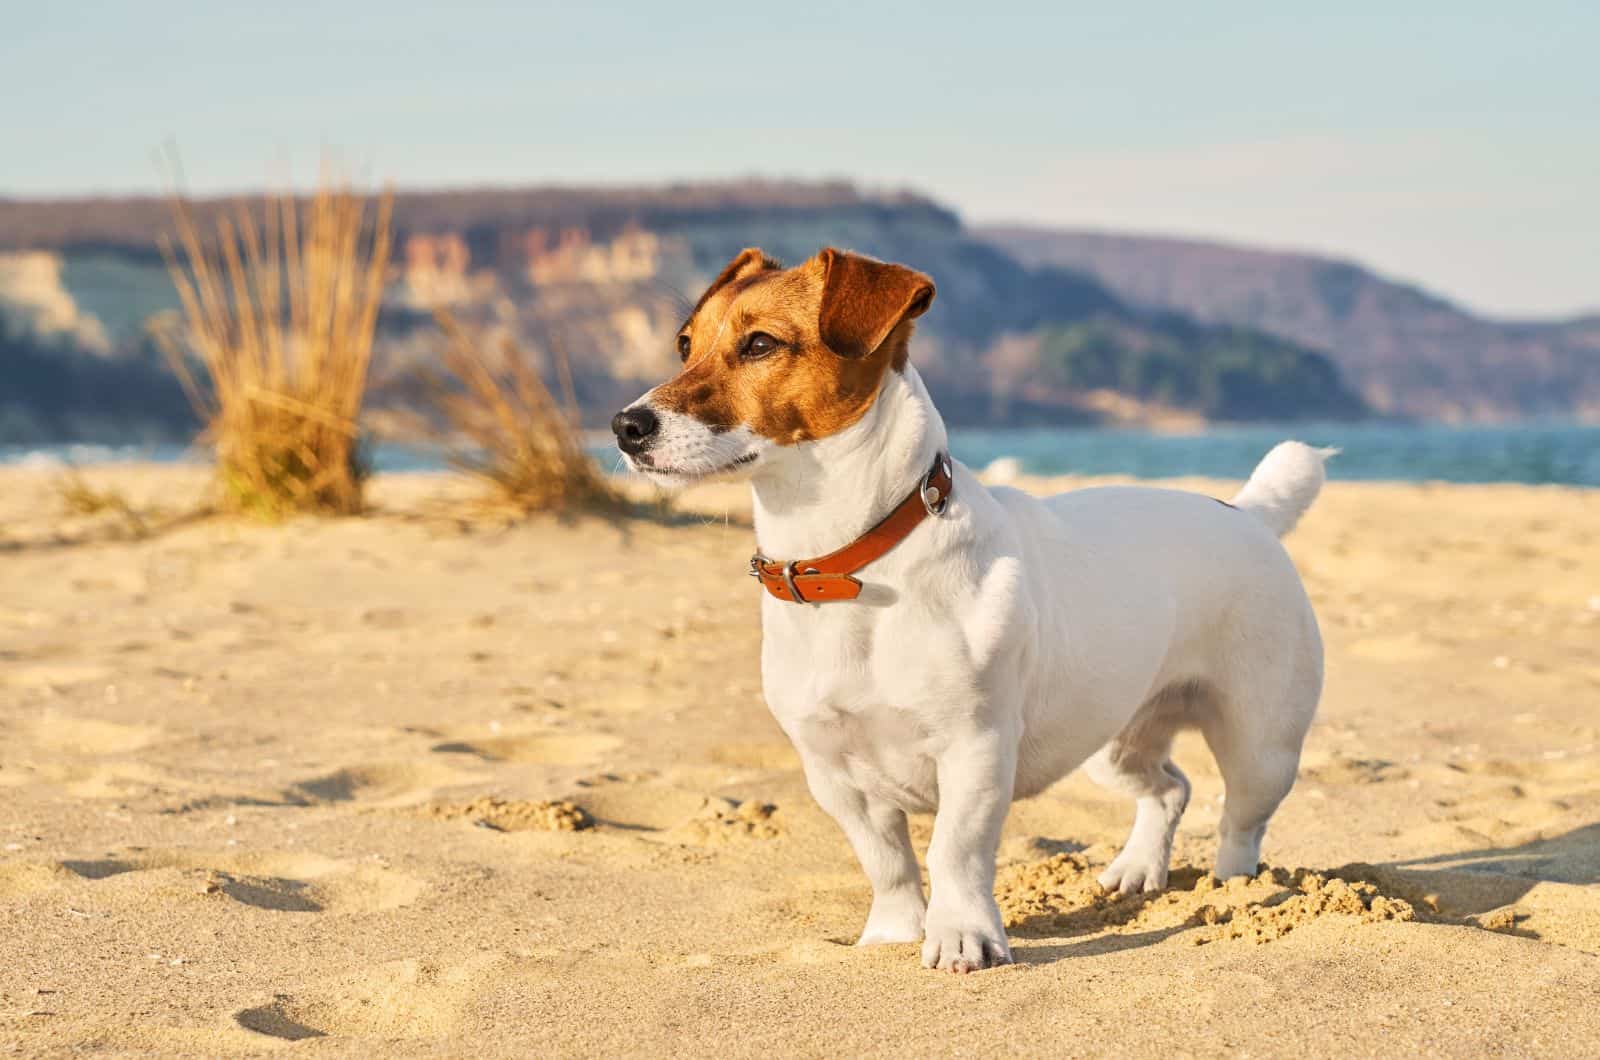 Jack Russell Terrier standing on sand